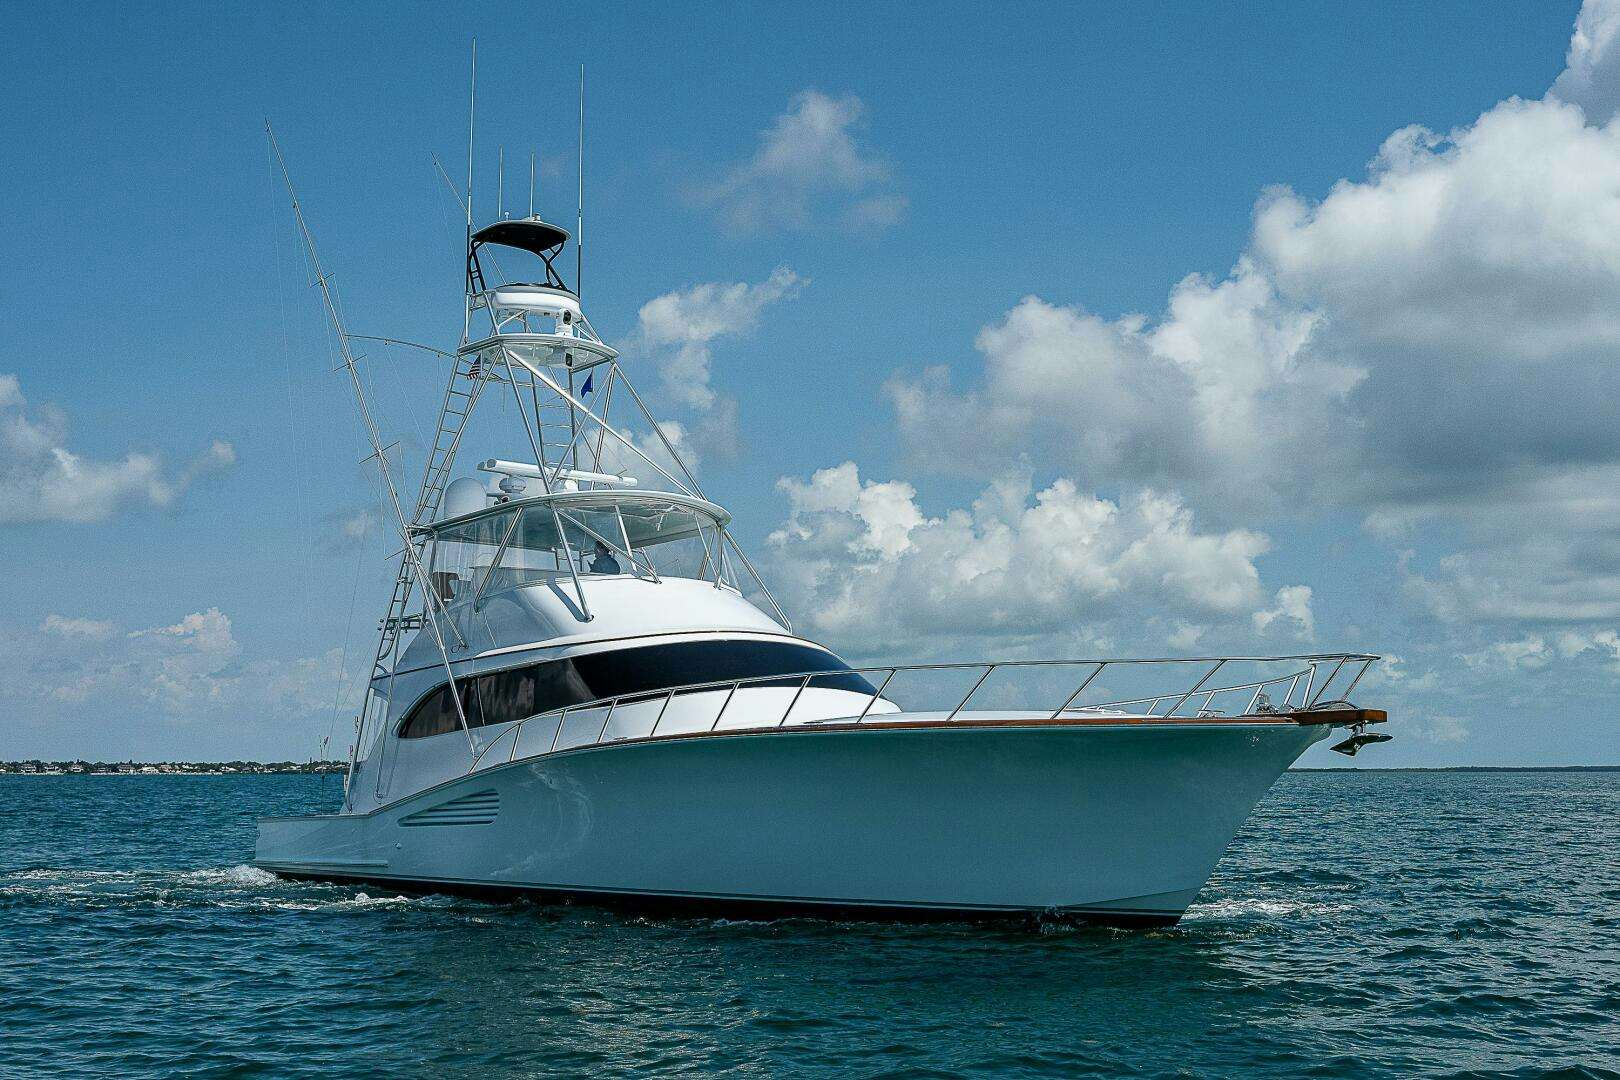 Maximus
Yacht for Sale